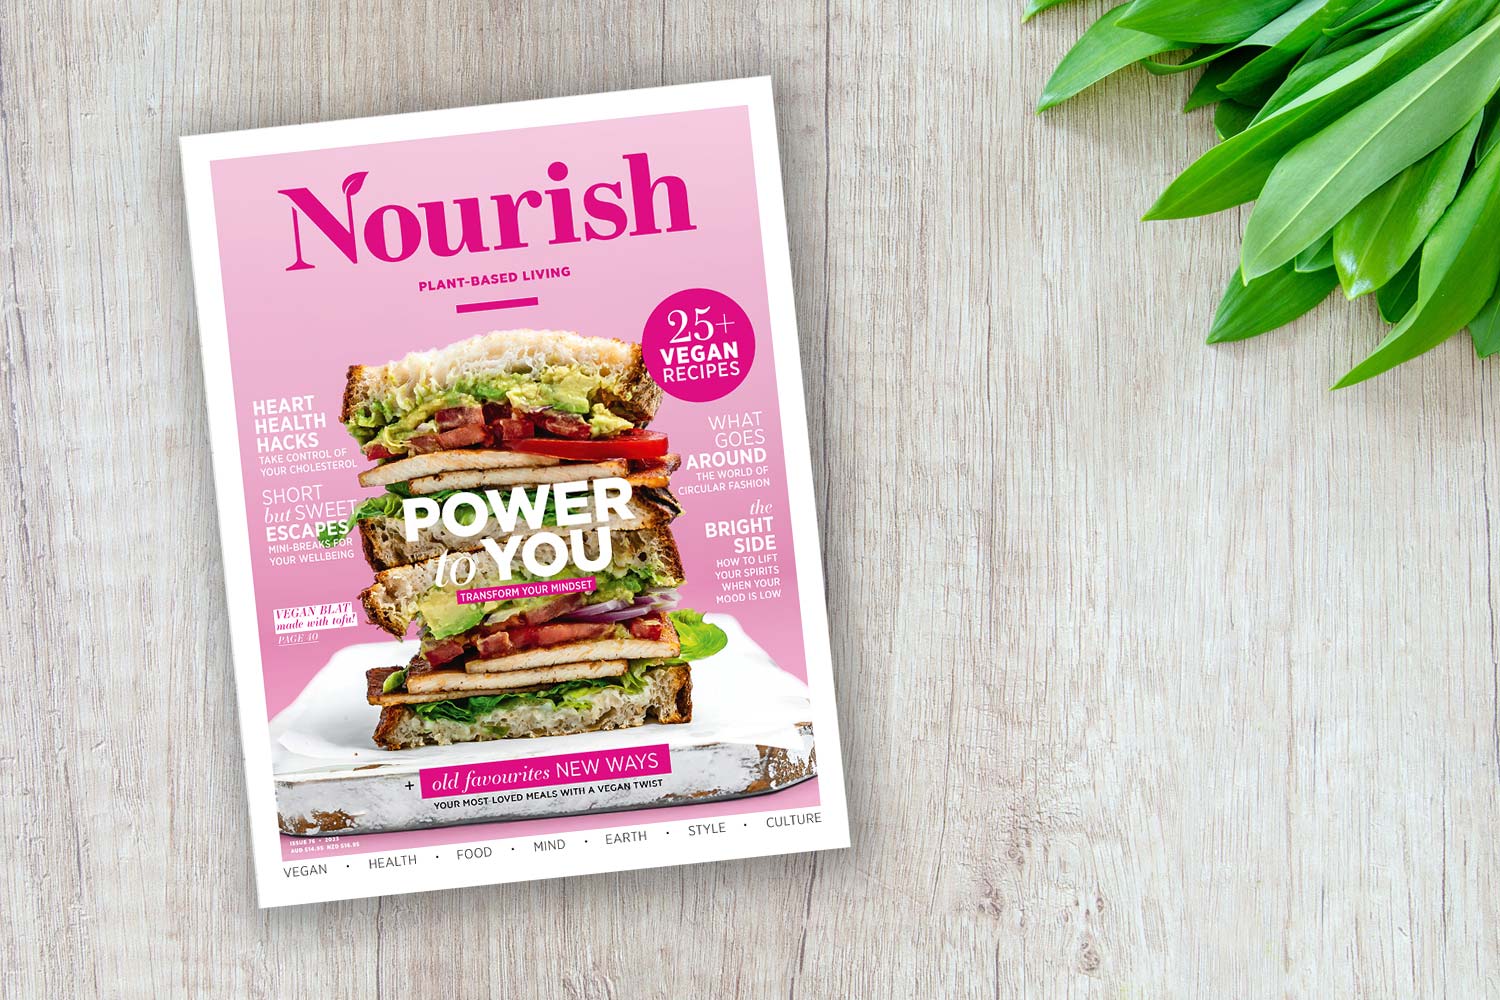 Cup Notes featured in Nourish Magazine - Notely